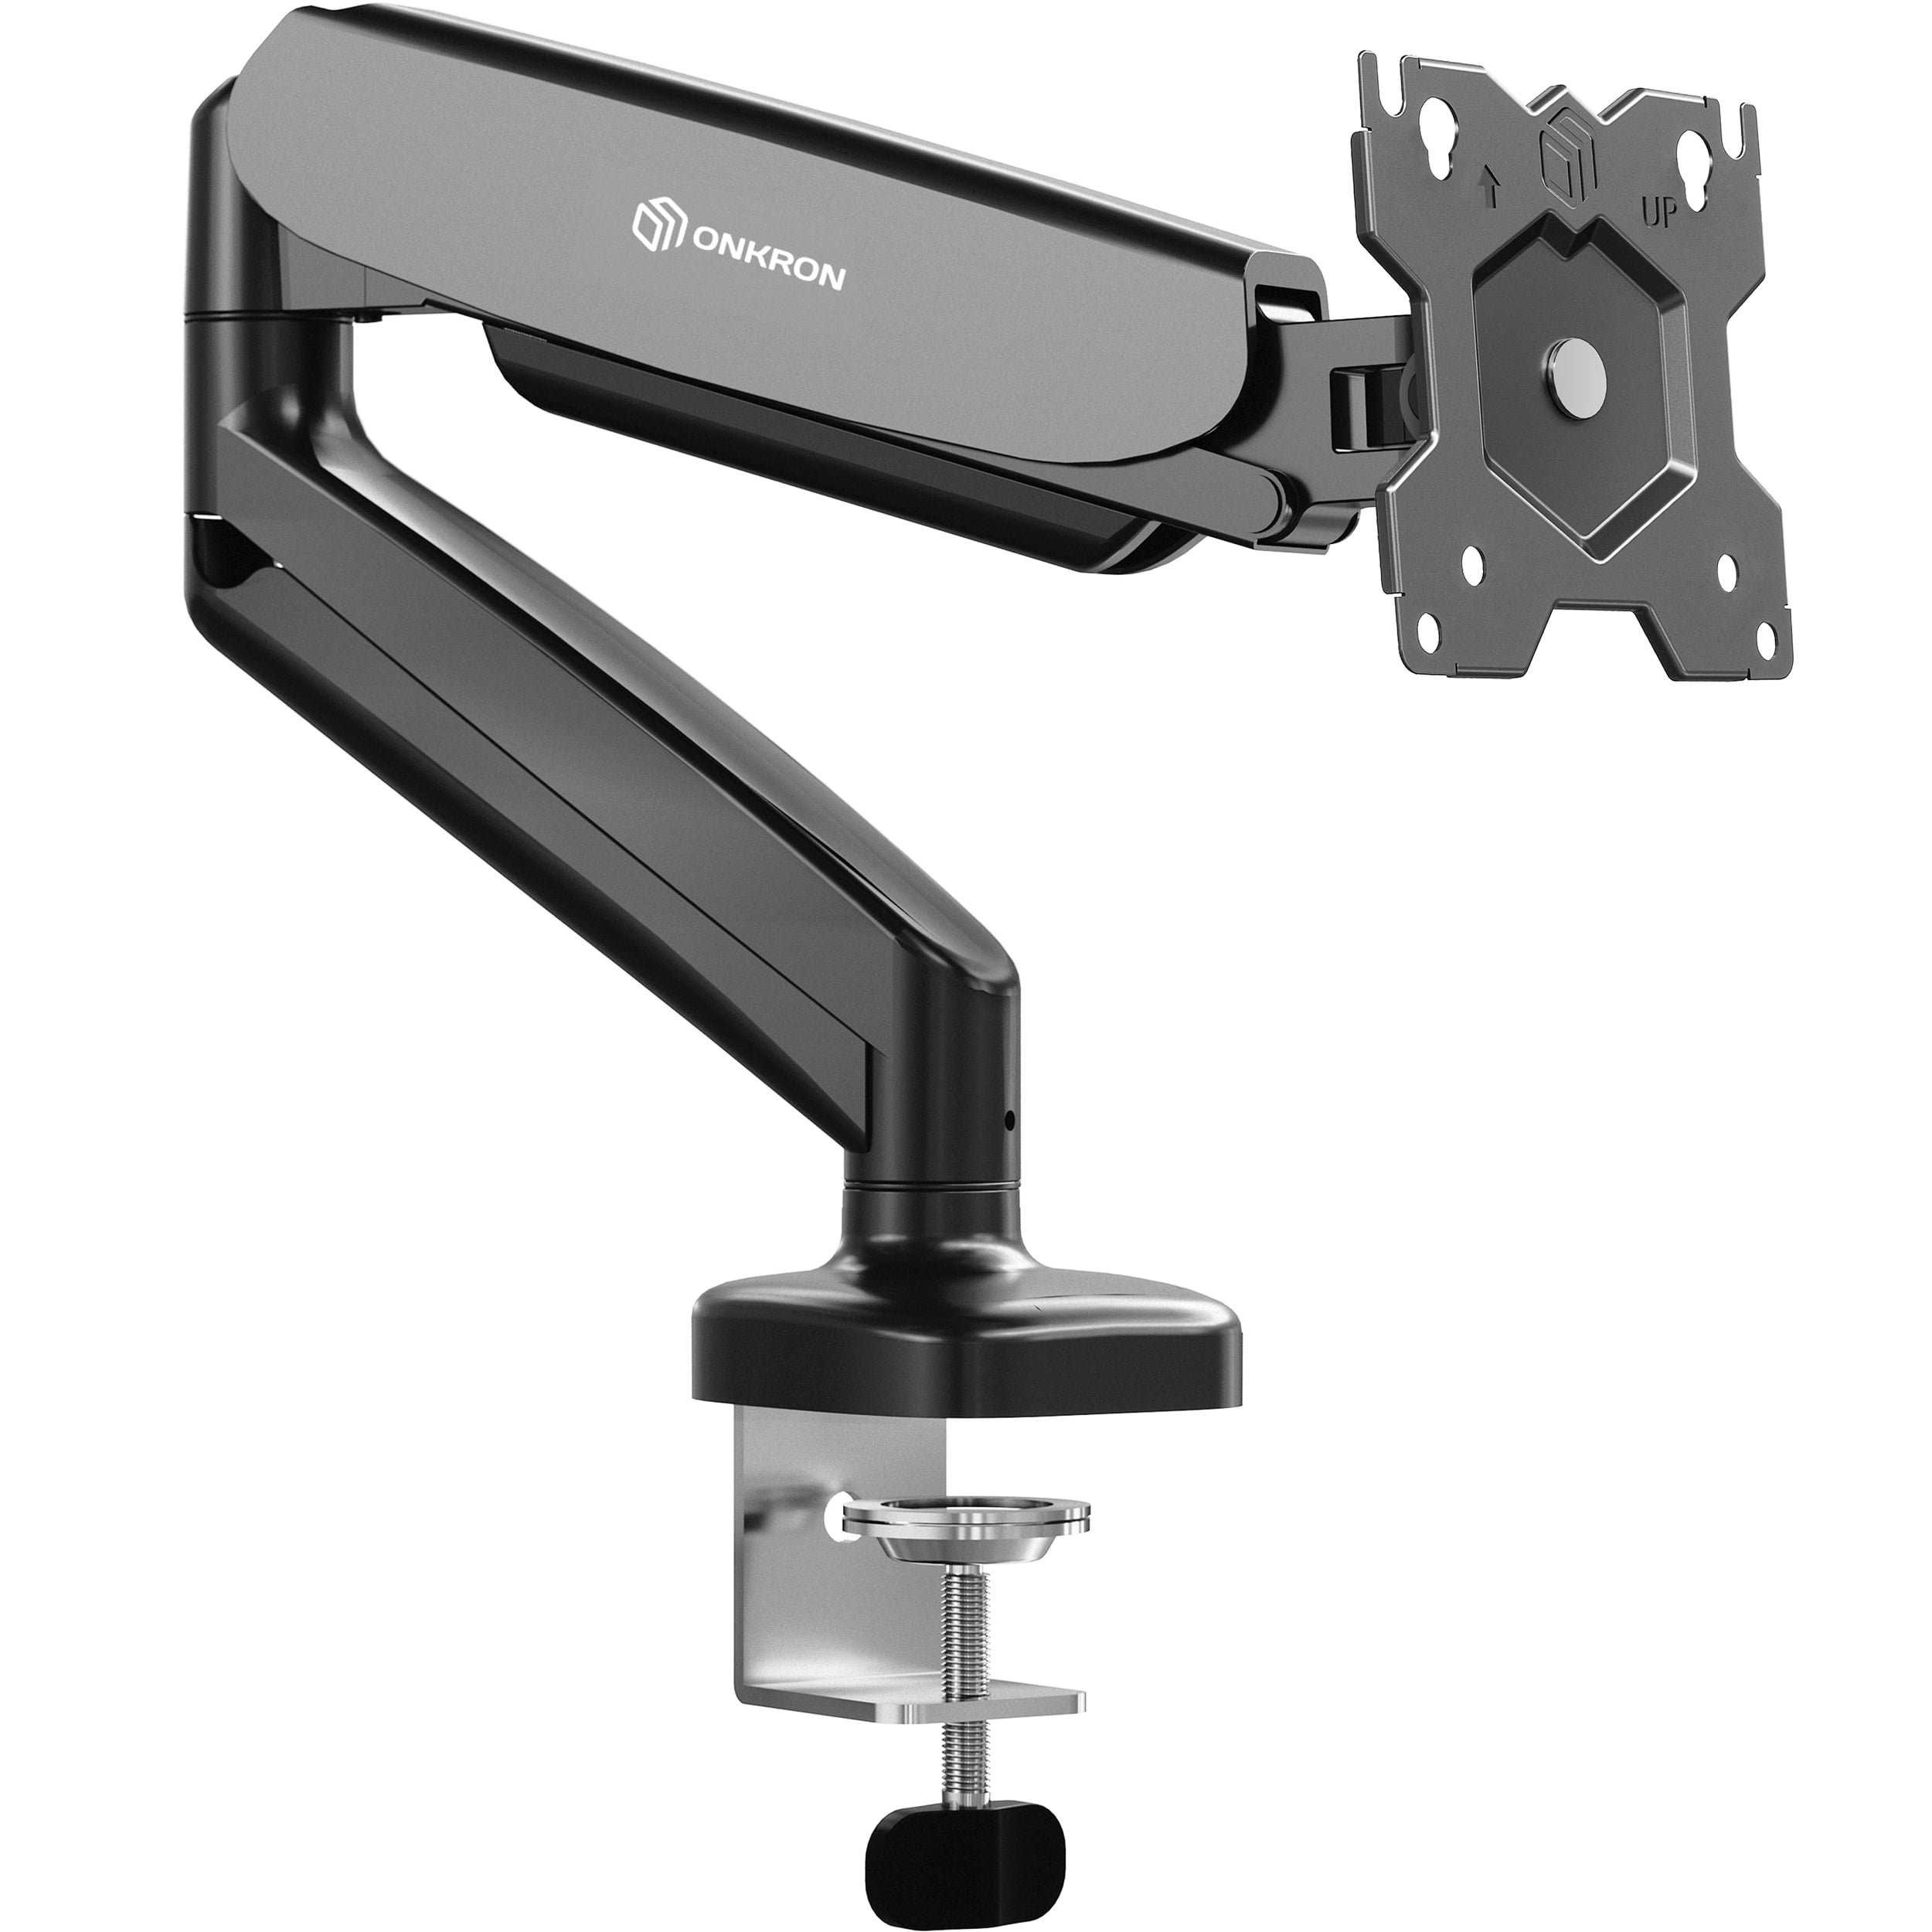 WALI Single Monitor Stand Mount Arm, Fully Adjustable Gas Spring Desk  Mount, with2 Easily Accessible USB 3.0 Ports, for Display Up to 35 Inch,  33lbs